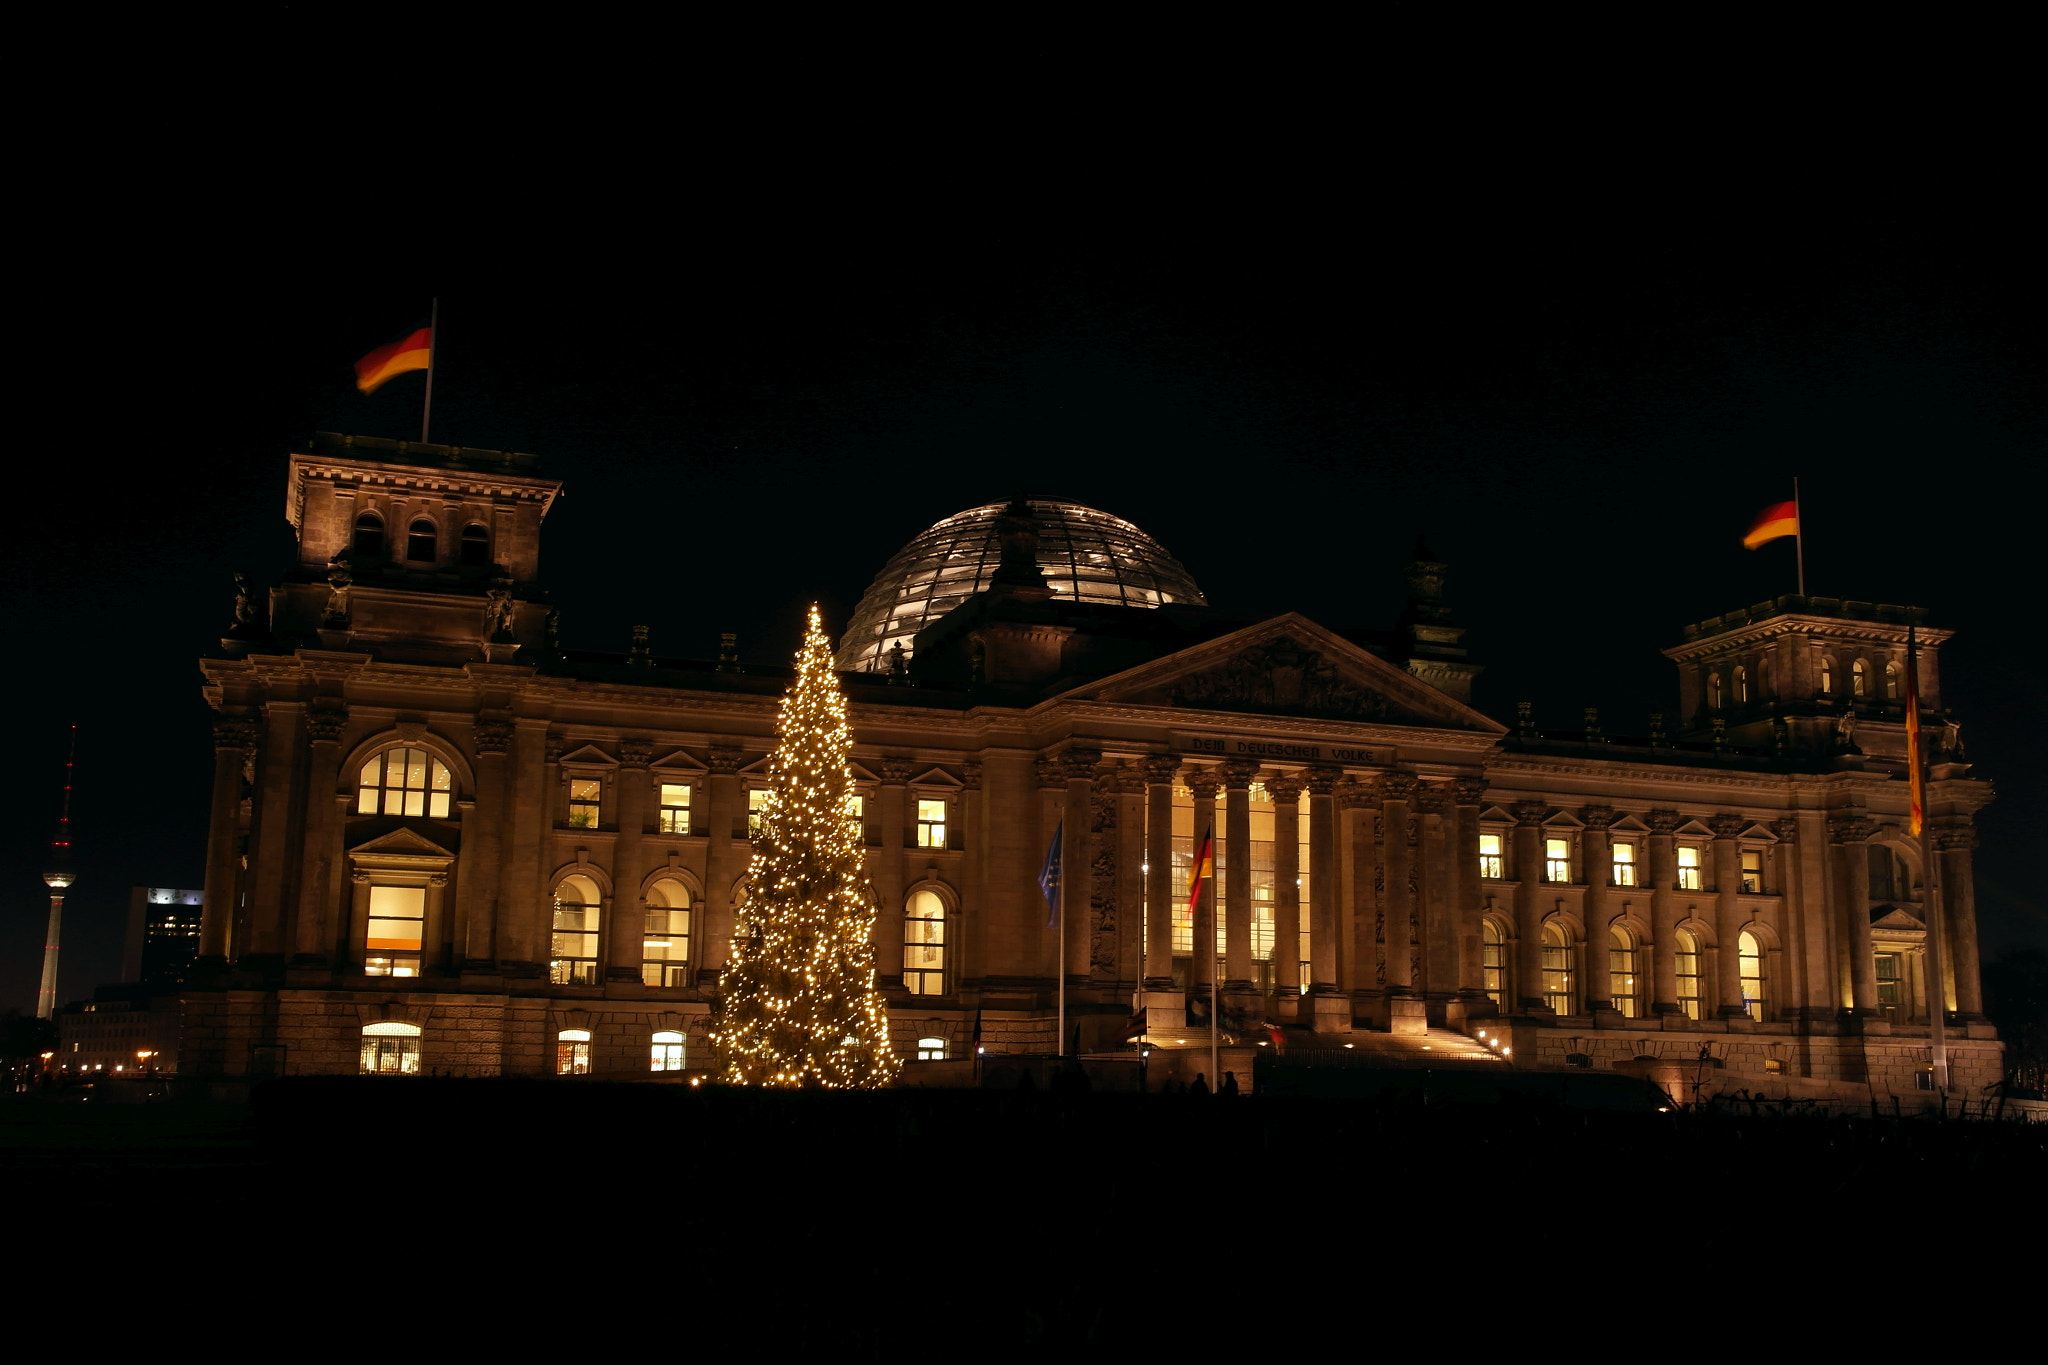 Samsung NX200 sample photo. Reichstag by night photography